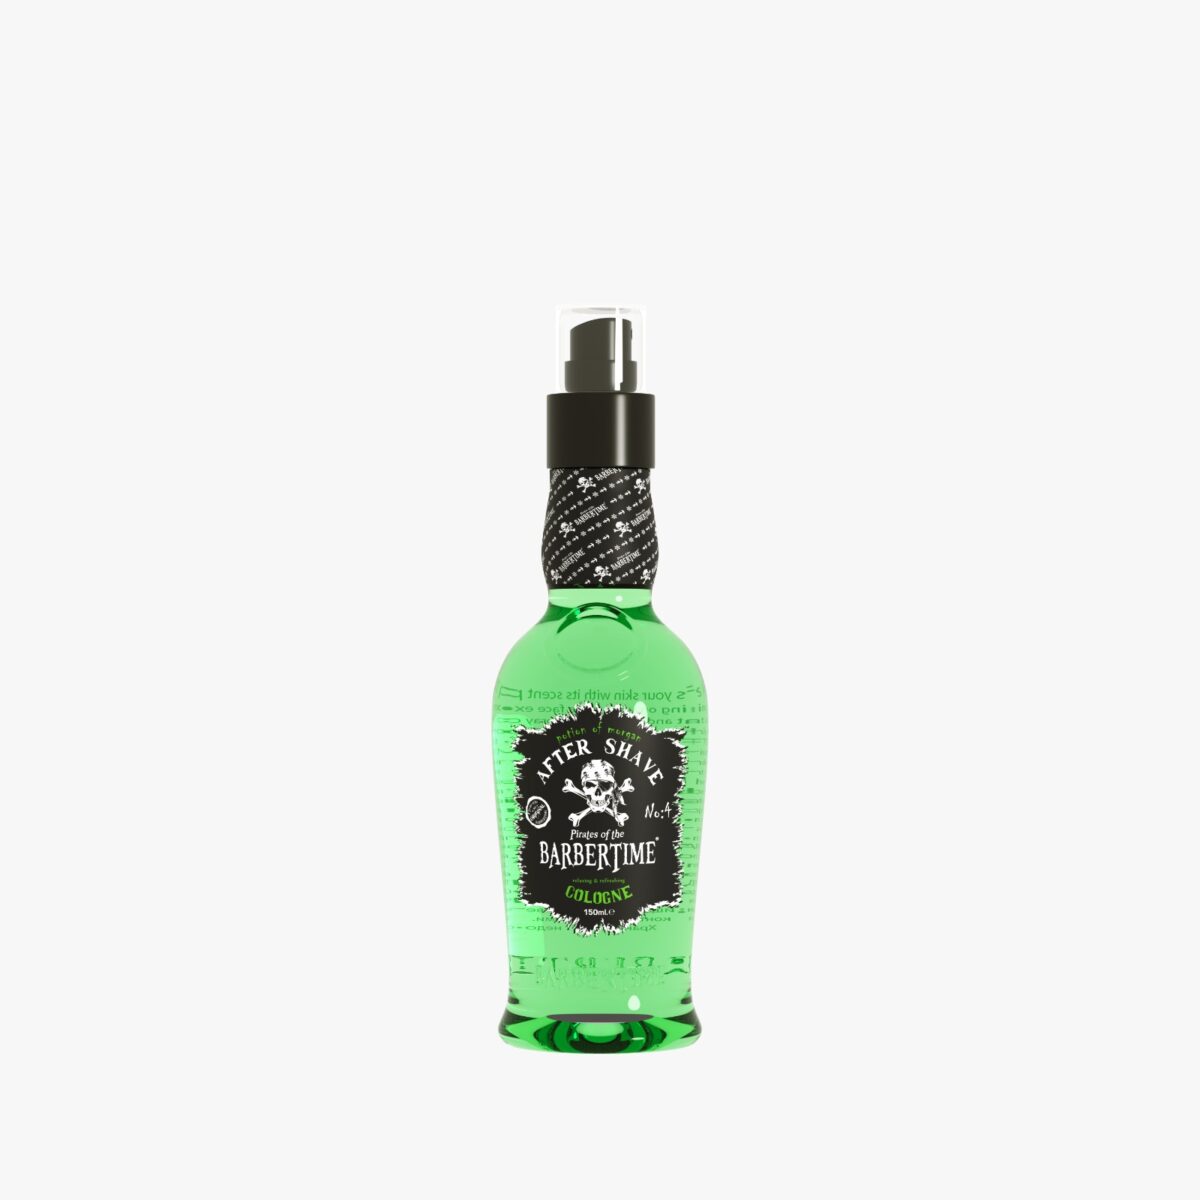 BARBERTIME AFTER SHAVE COLOGNE Potion of Morgan N.2 150ml